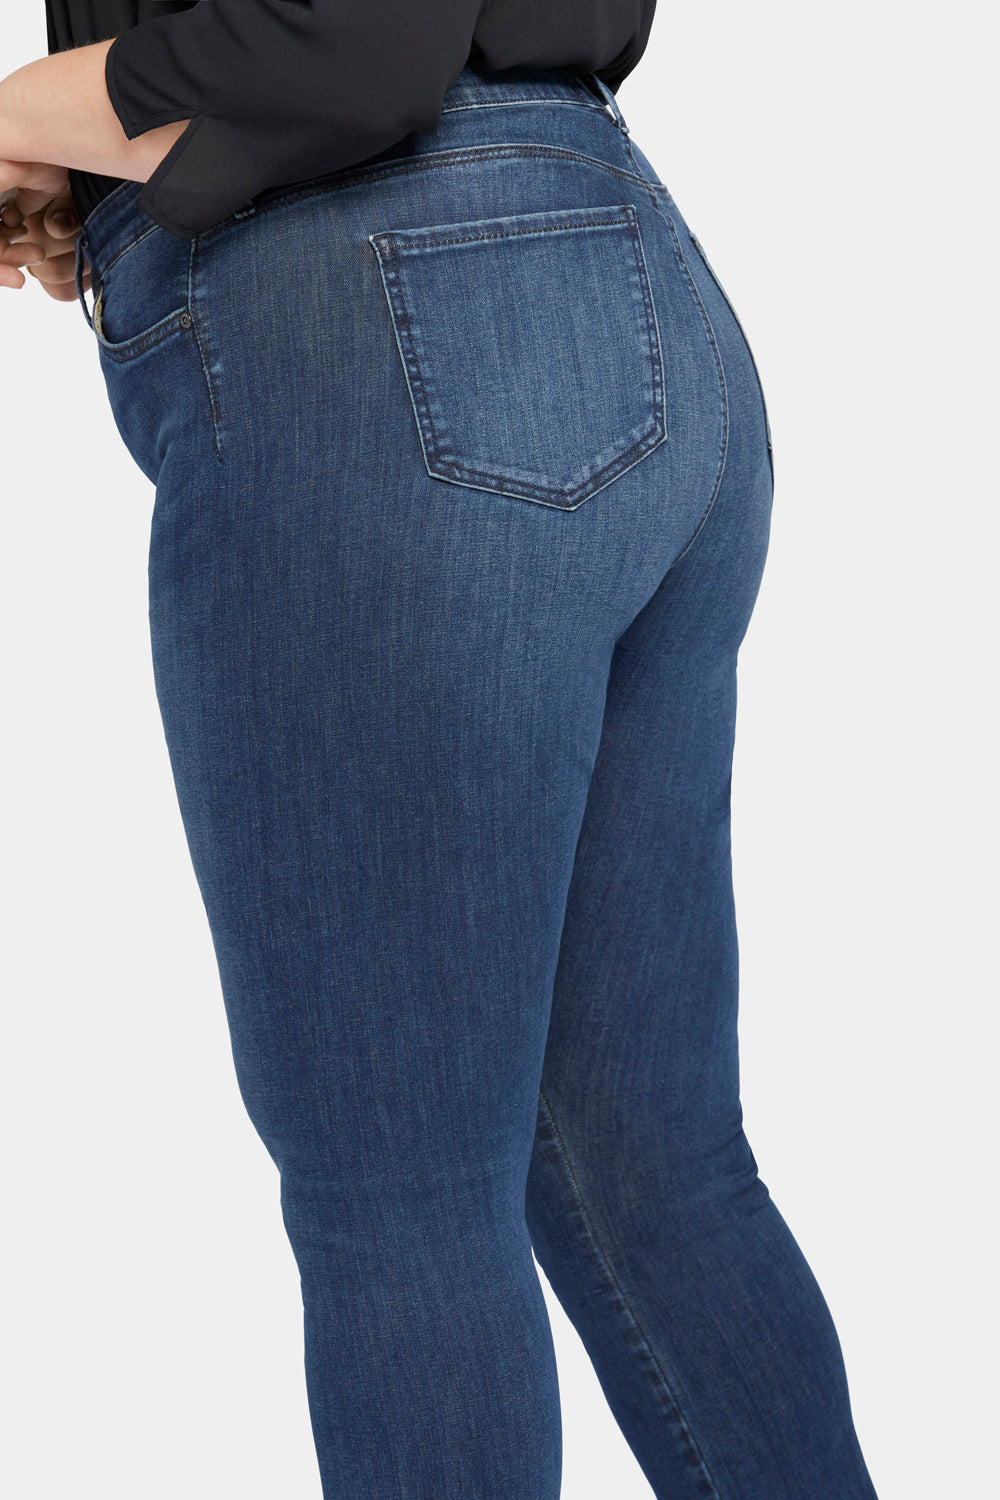 NYDJ Le Silhouette Slim Bootcut Jeans In Plus Size With High Rise  - Precious